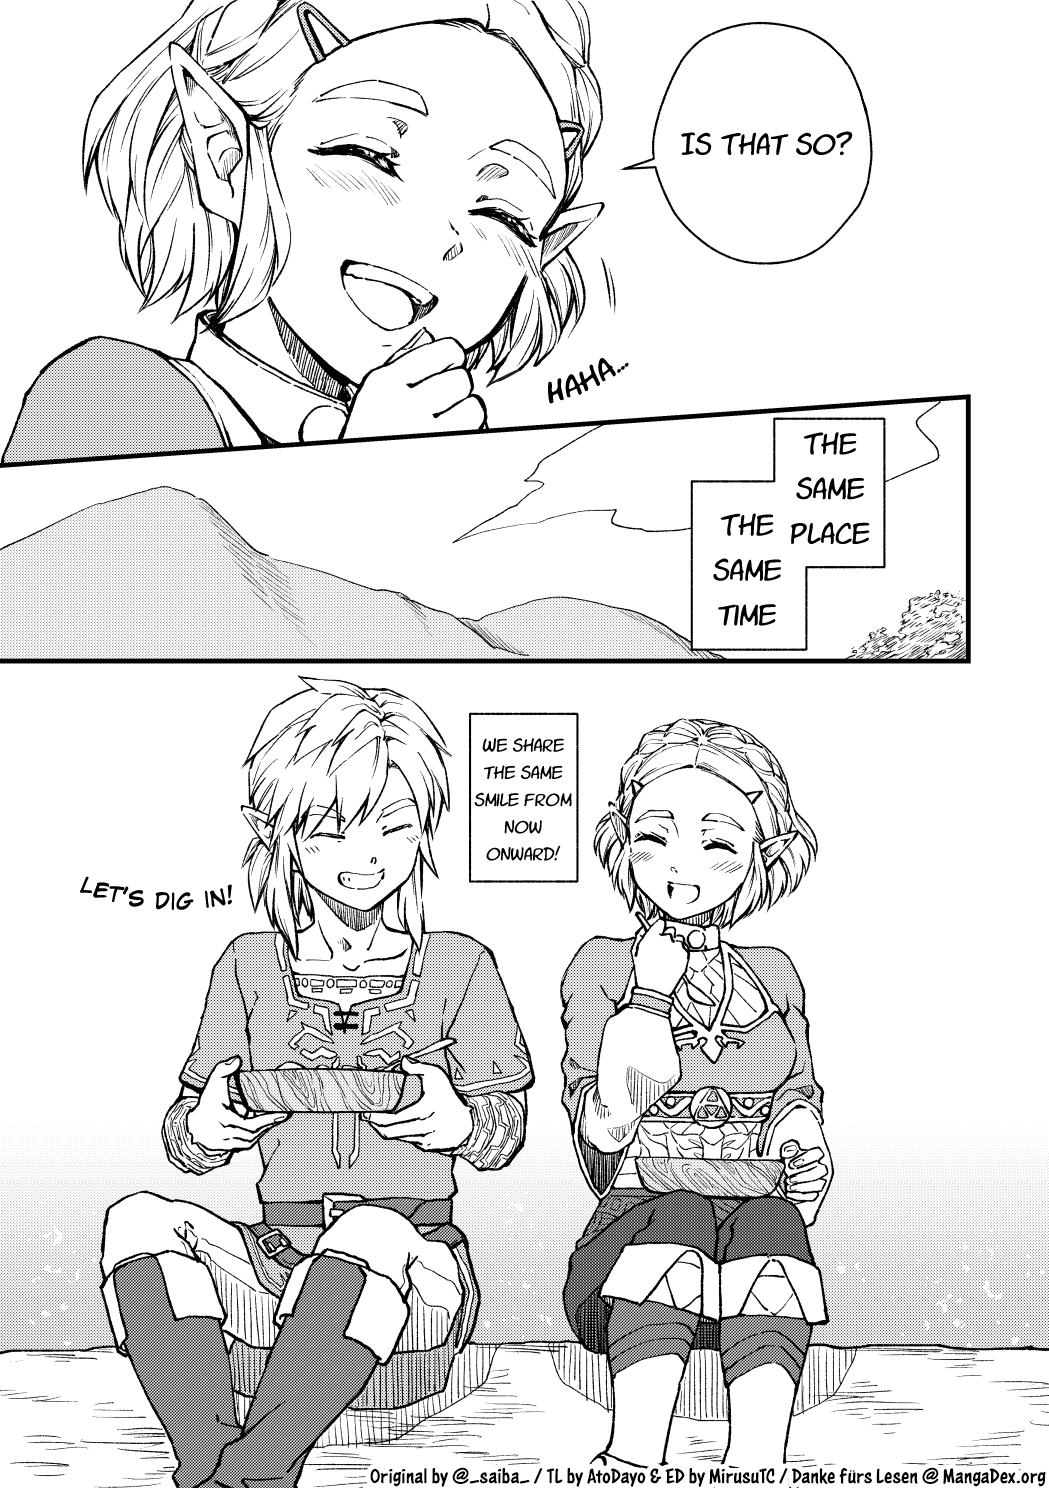 The Legend of Zelda Breath of the Wild - At the same time, with the same face manga